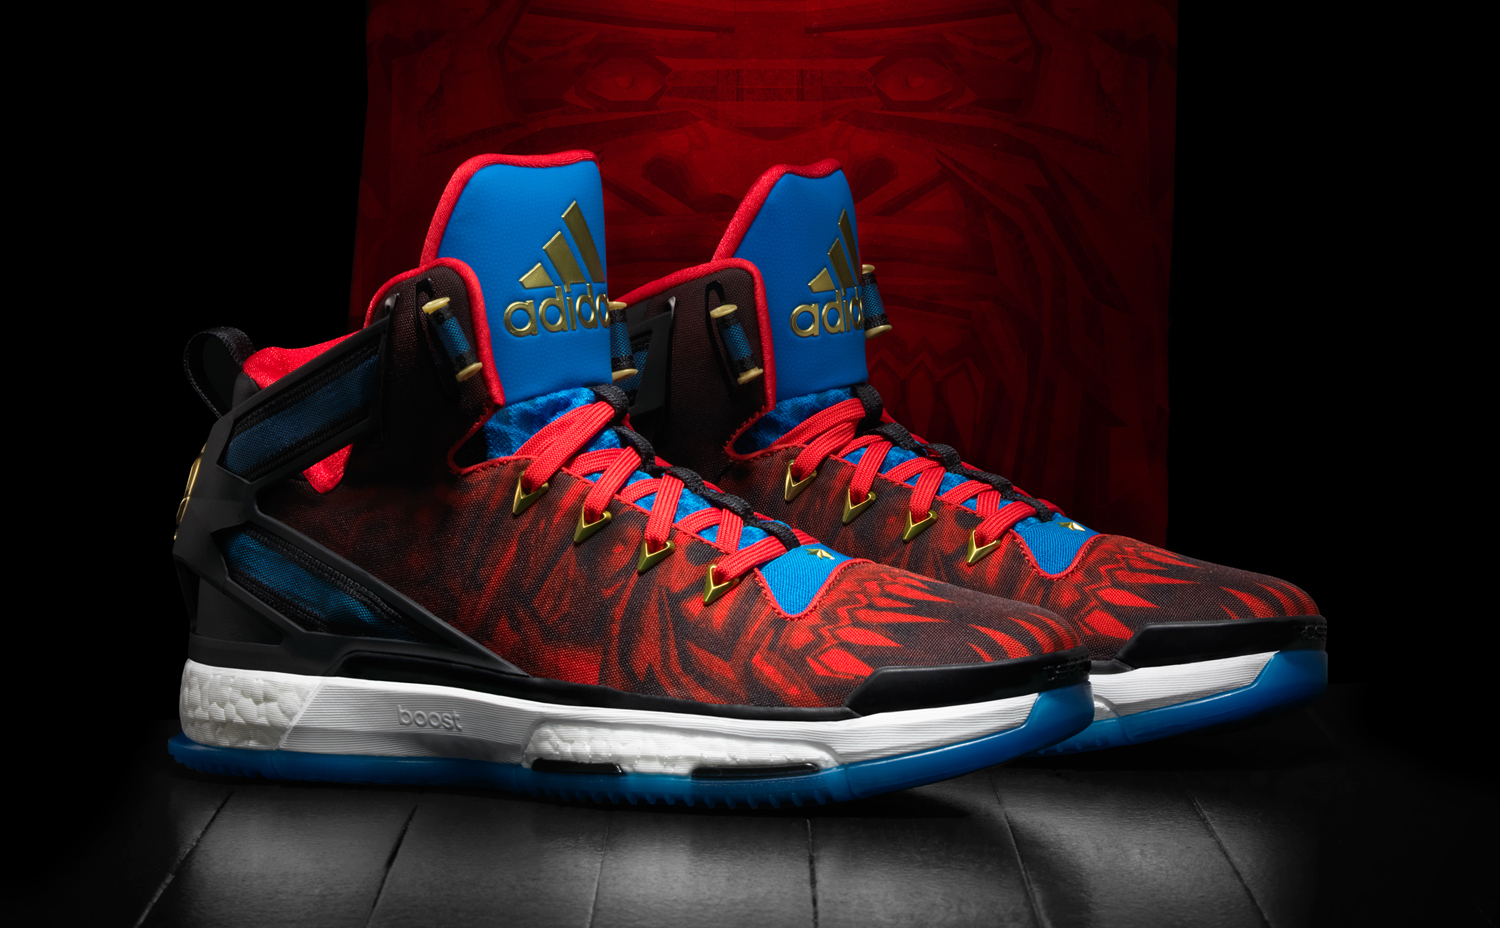 Adidas Basketball Rings Chinese New Year via 'Fire Monkey' Shoes |